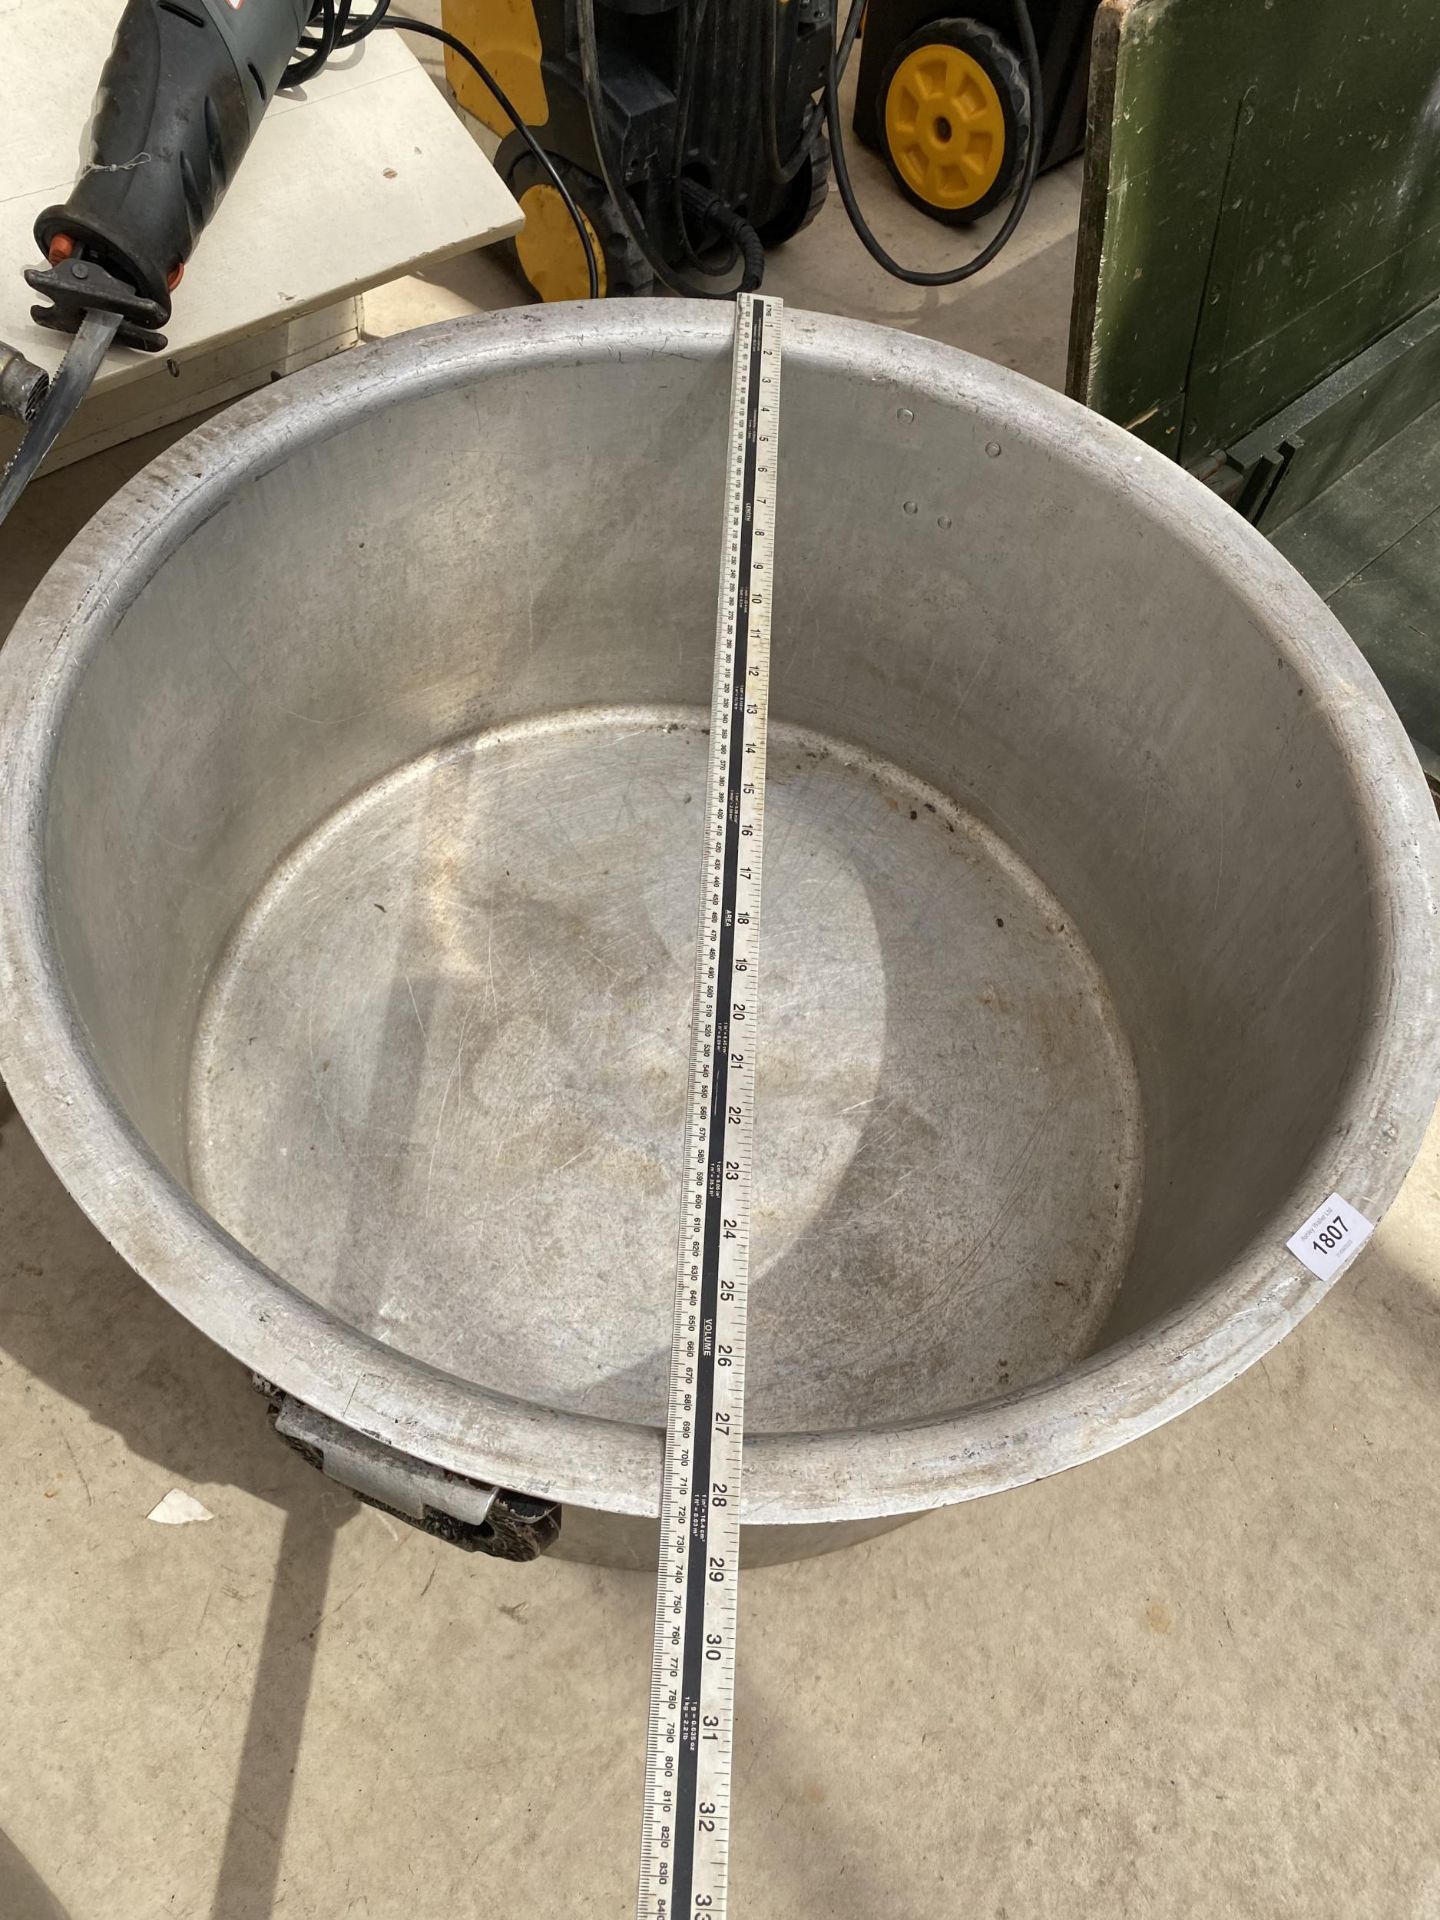 A VERY LARGE STAINLESS STEEL COOKING POT - Image 2 of 3